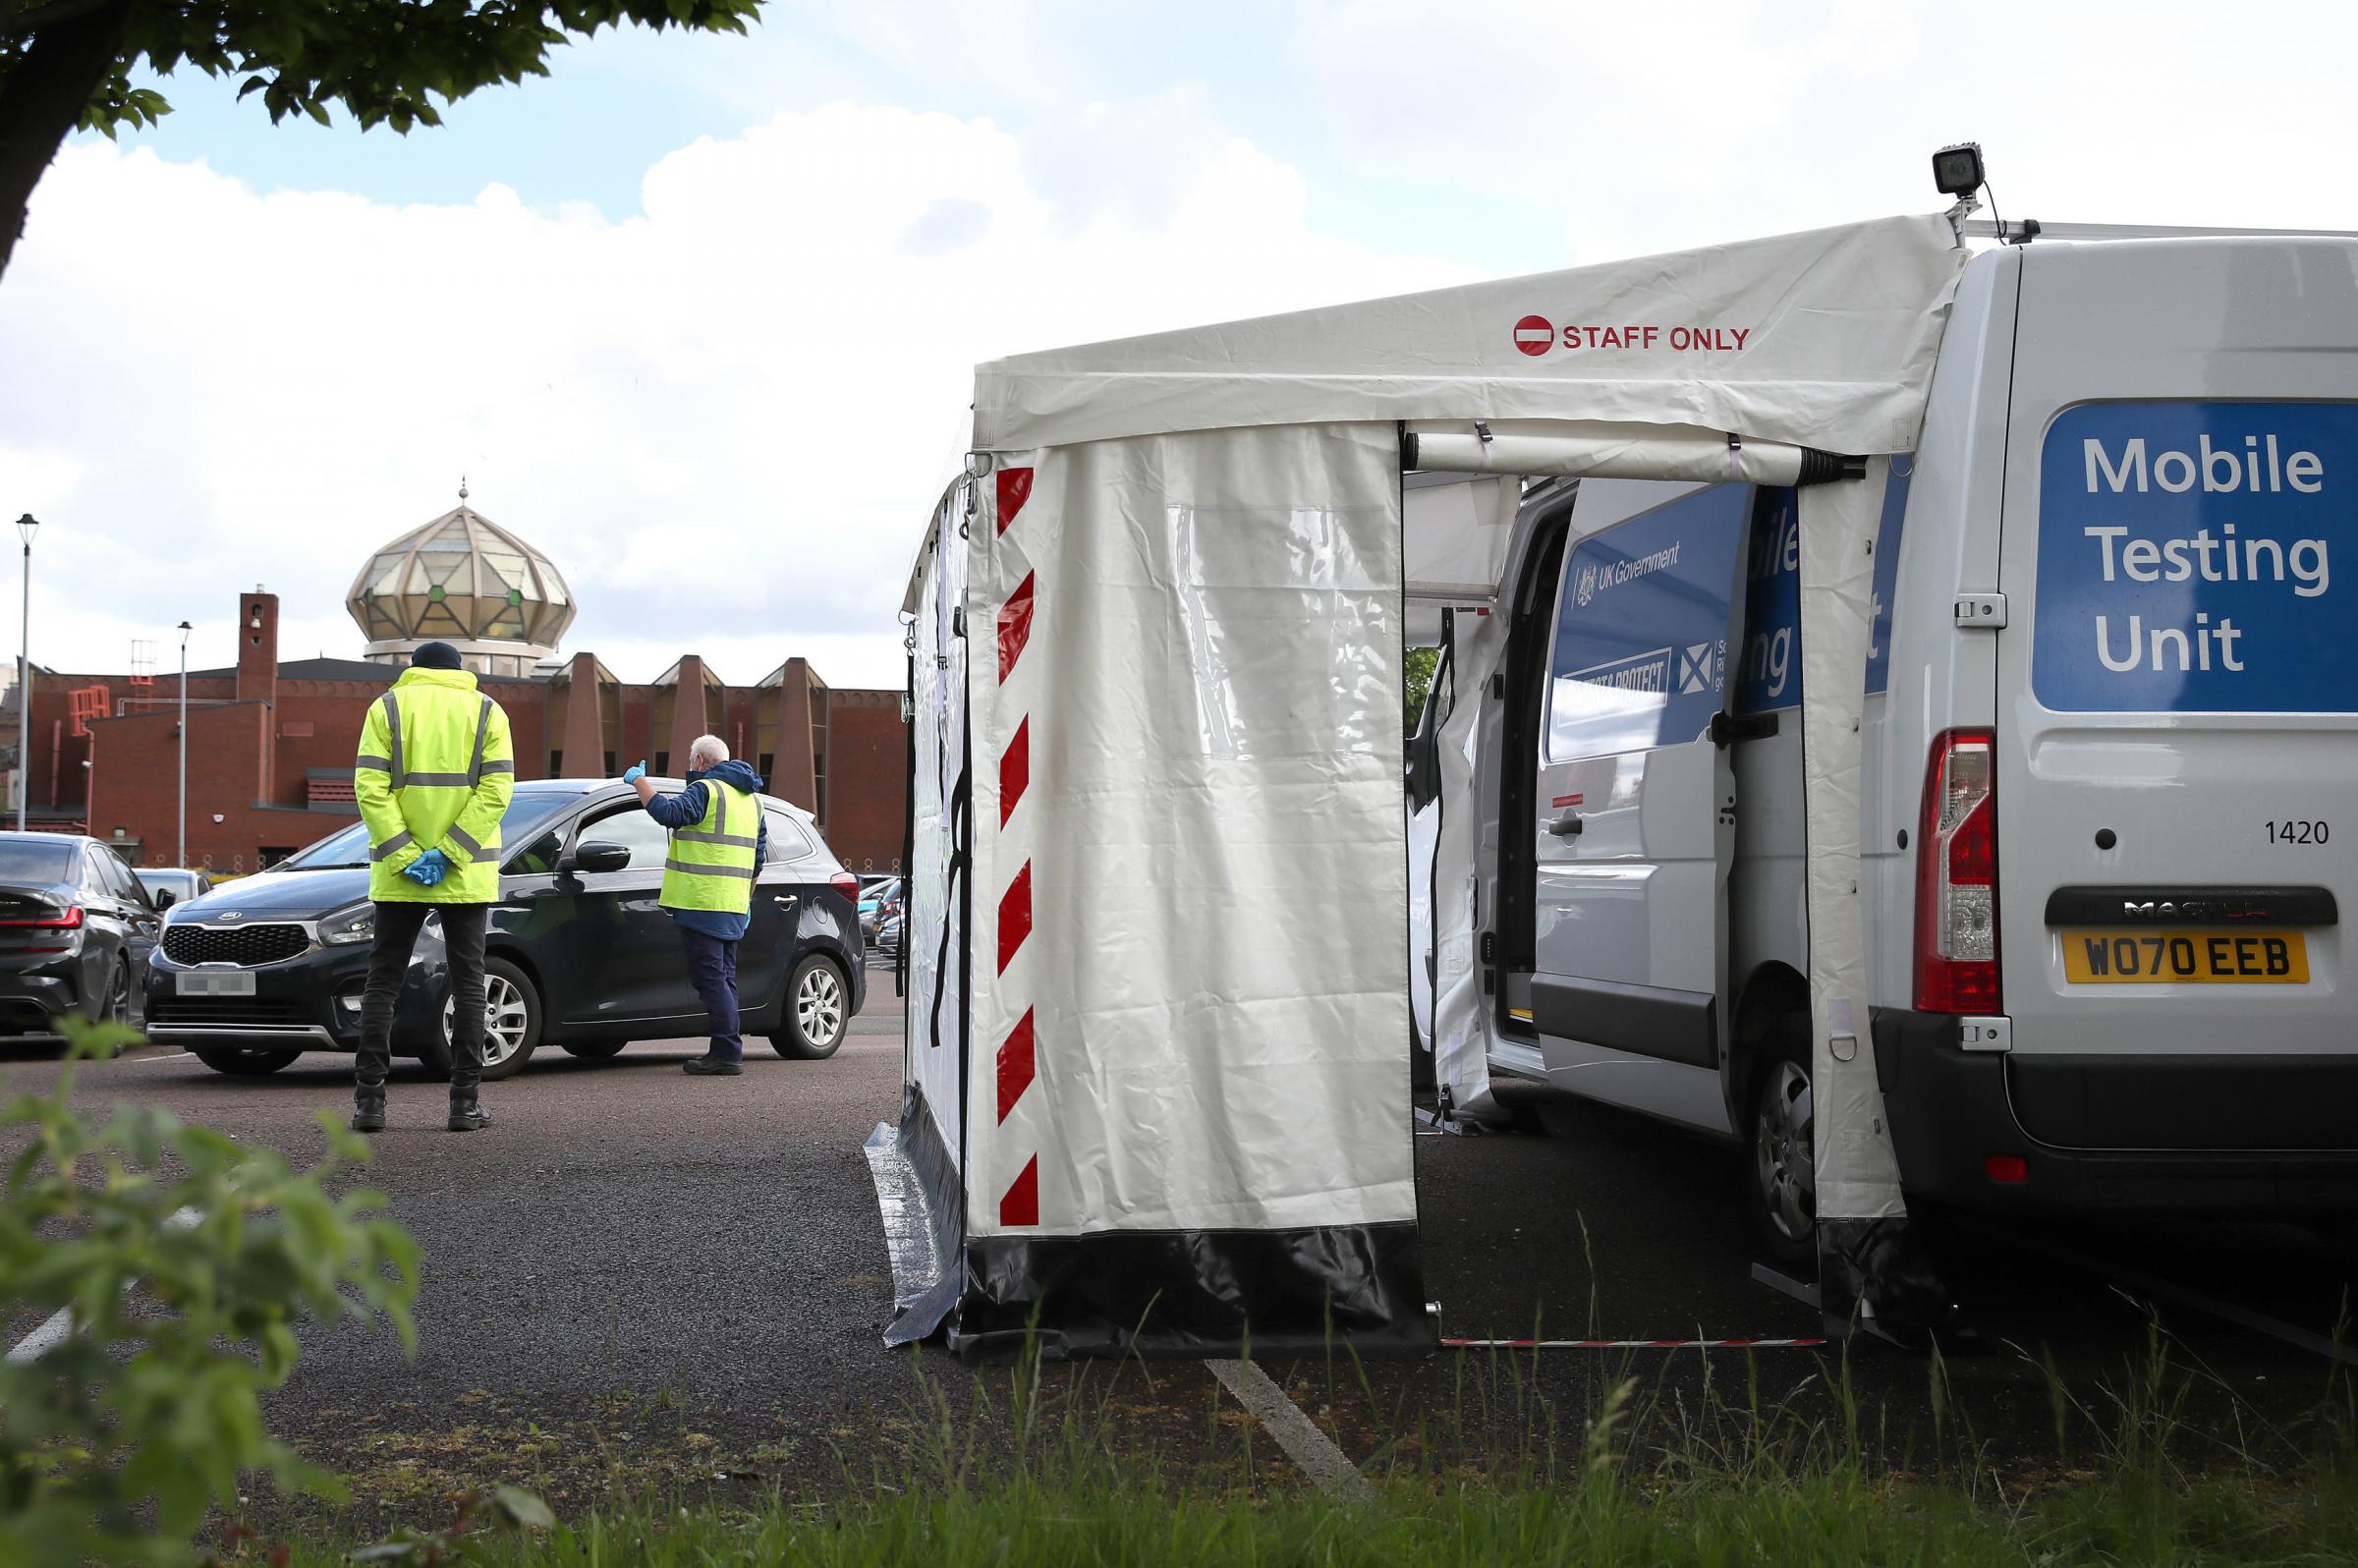 Staff from the Scottish Ambulance Service run a Covid Mobile Testing Unit in the car park of the Glasgow Central Mosque Picture: Andrew Milligan/PA Wire